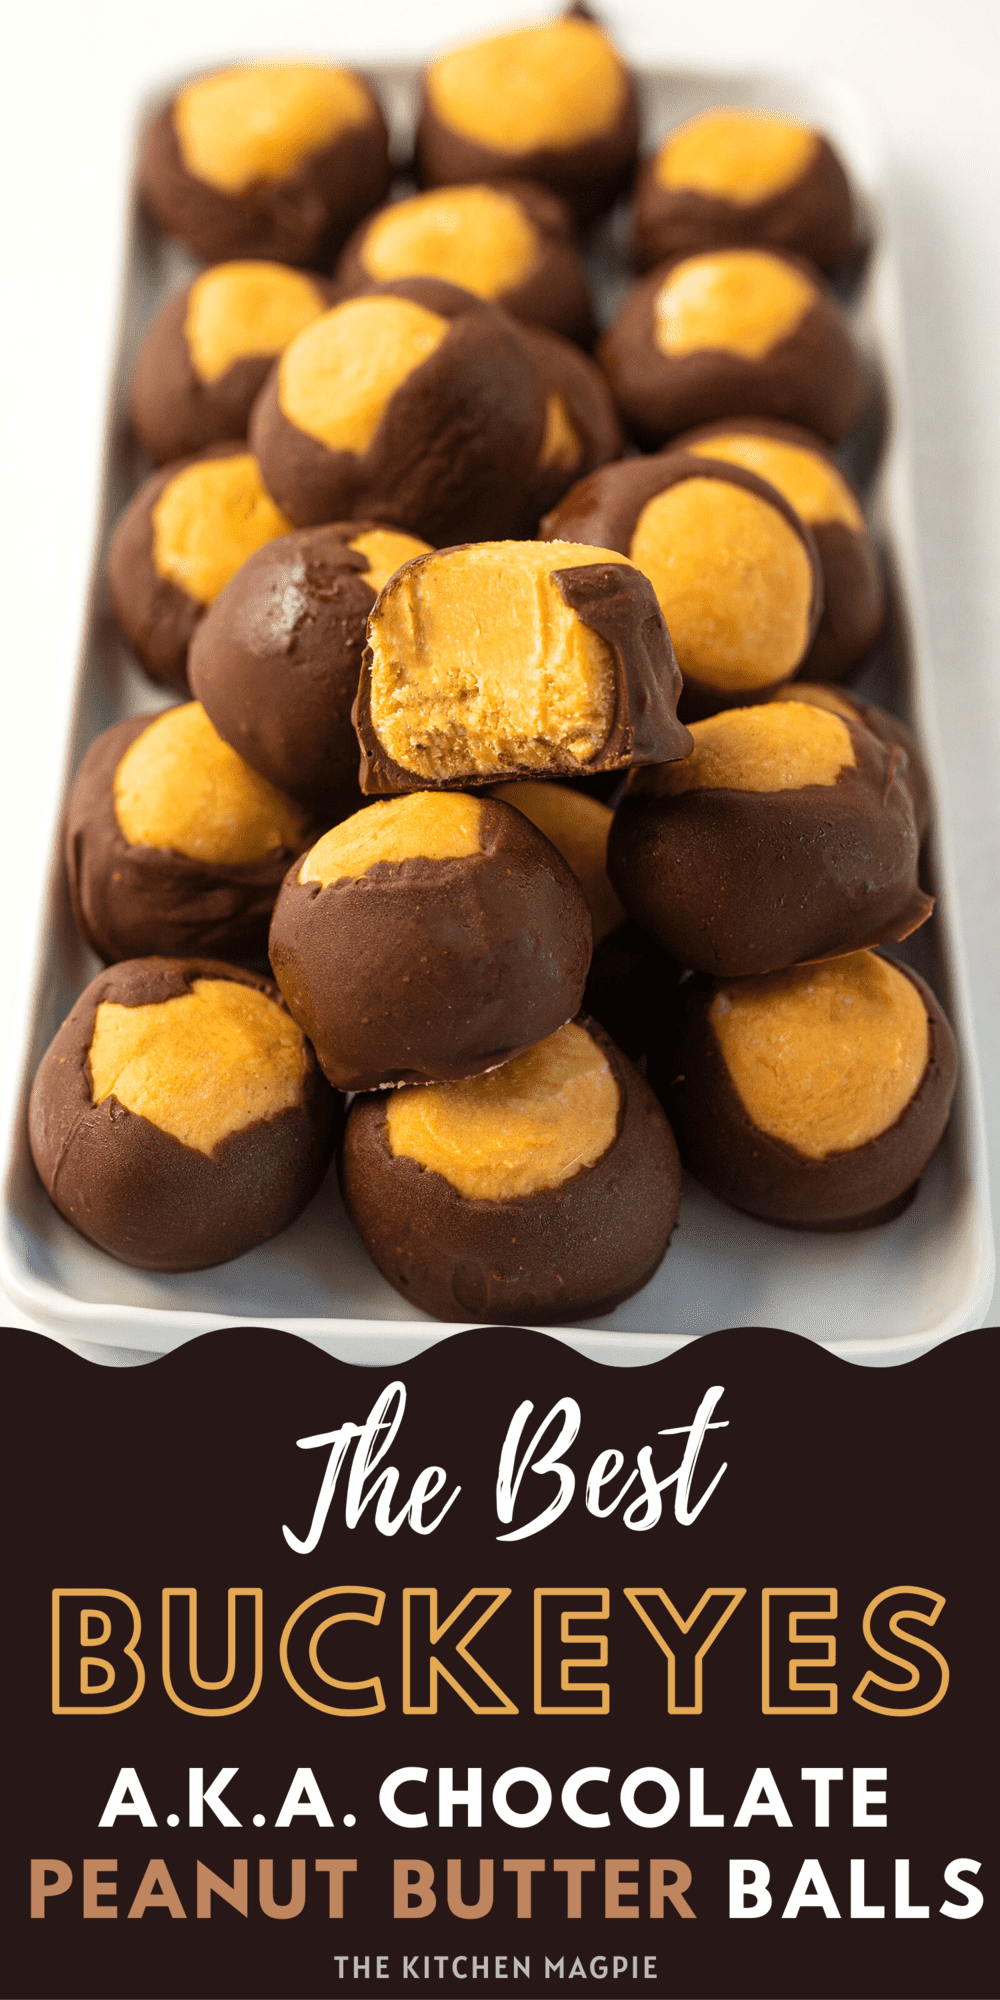 Buckeye candy, AKA chocolate covered peanut butter balls, are the perfect easy dessert made from of the best marriage of ingredients ever – peanut butter and chocolate!